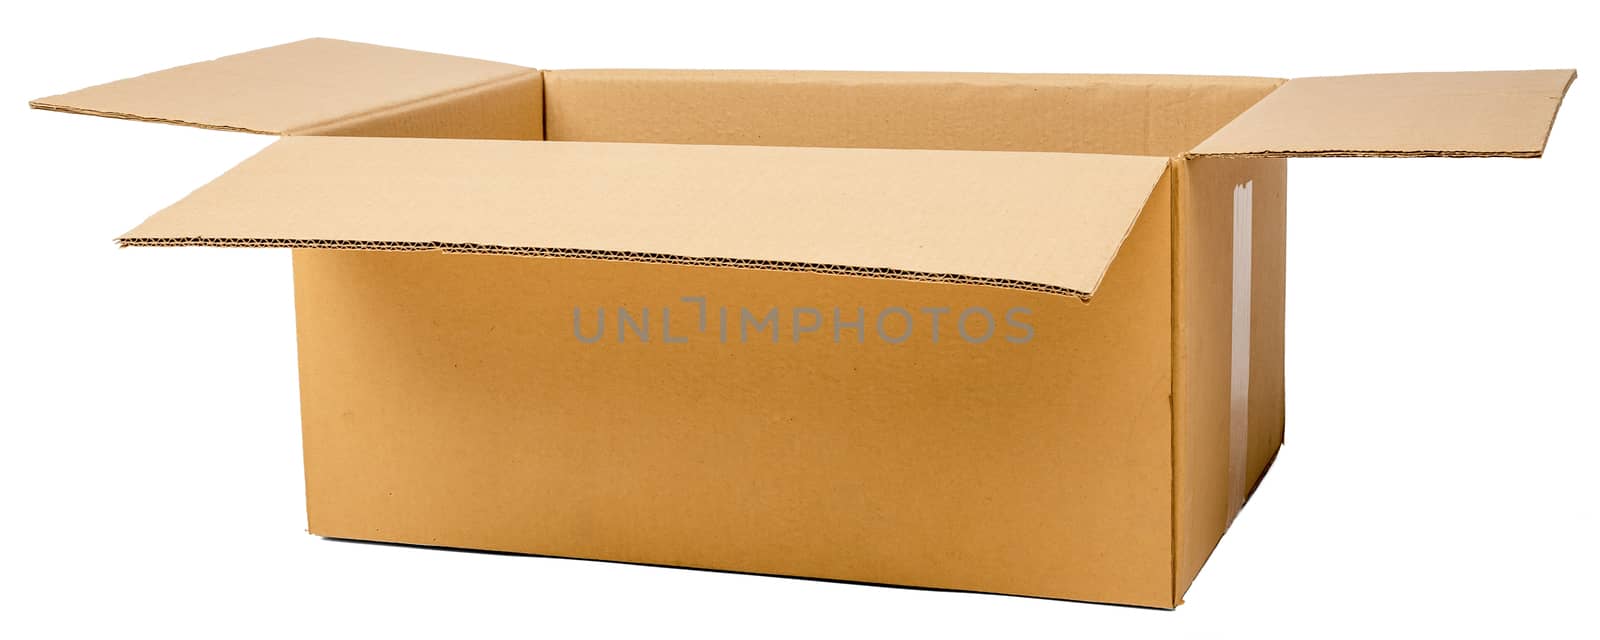 Open brown cardboard box. Front view. Isolated on white background